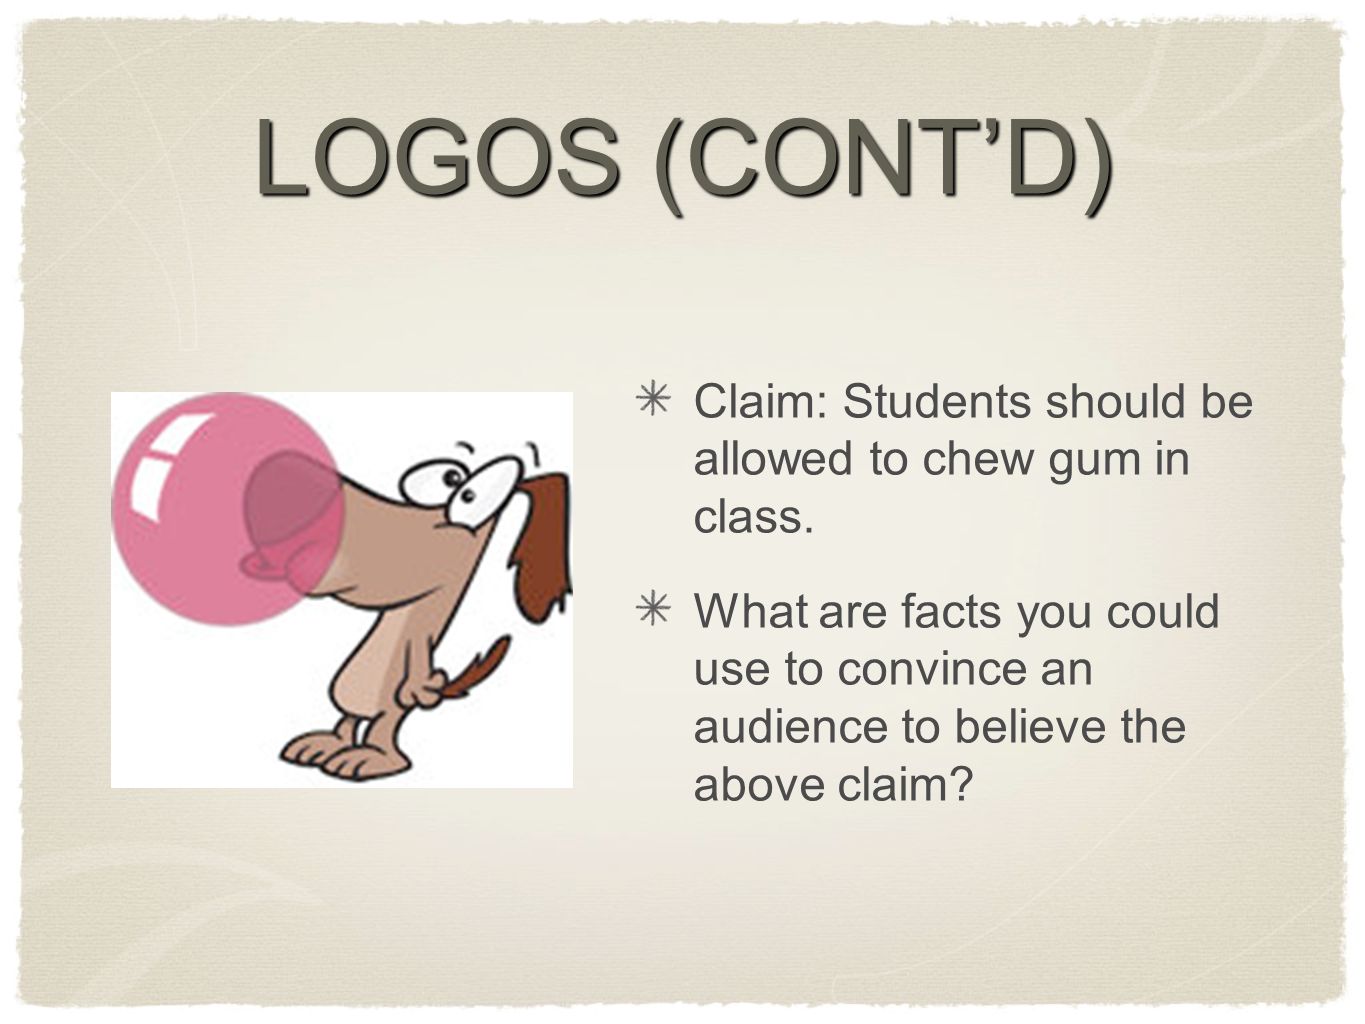 LOGOS (CONT’D) Claim: Students should be allowed to chew gum in class.